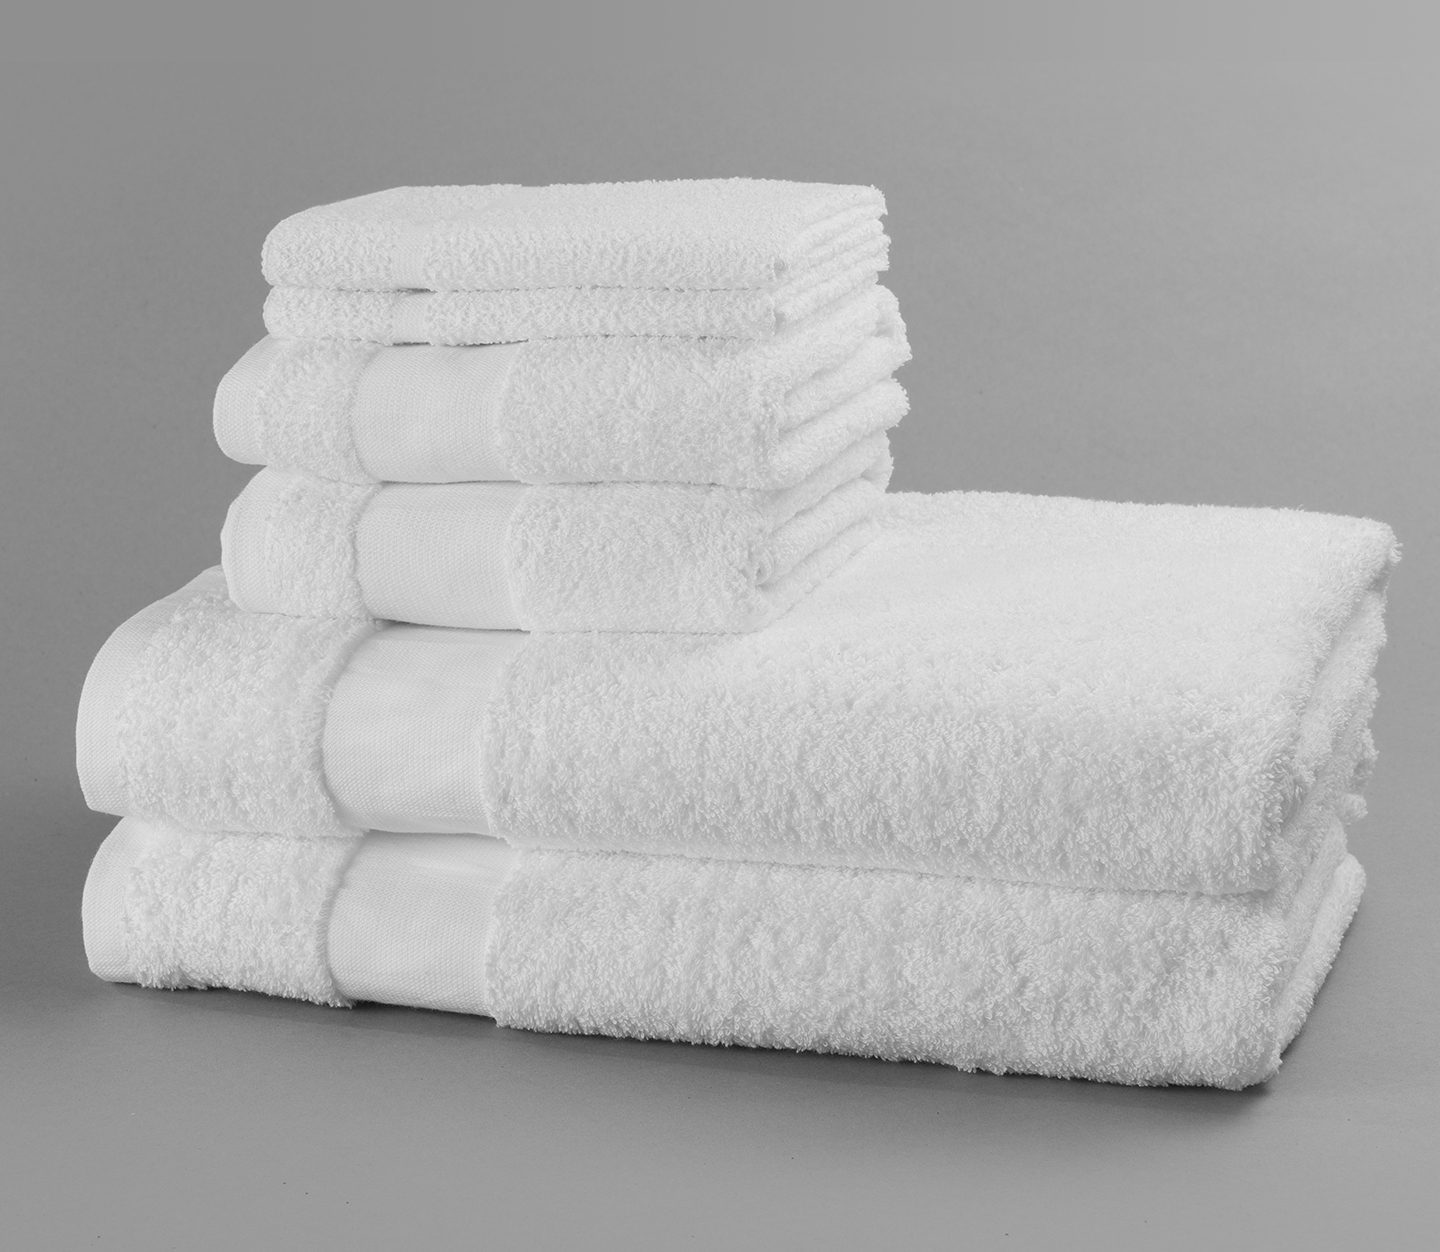 Standard Textile Launches Made in USA Hotel Terry and Sheeting